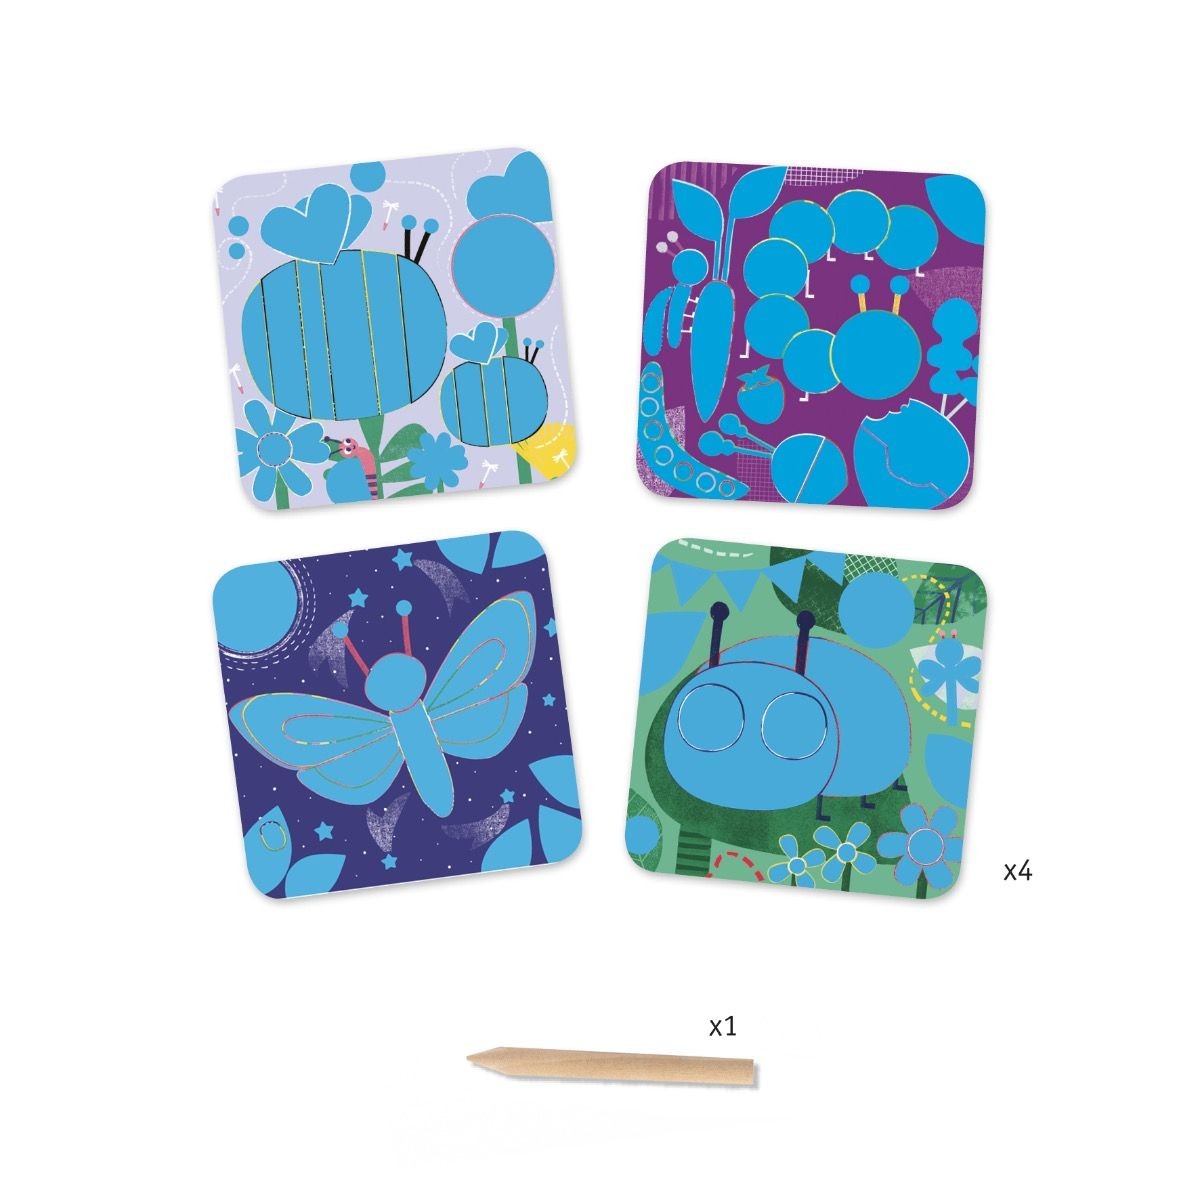 Bugs - Small Gifts For Little Ones - Scratch Cards